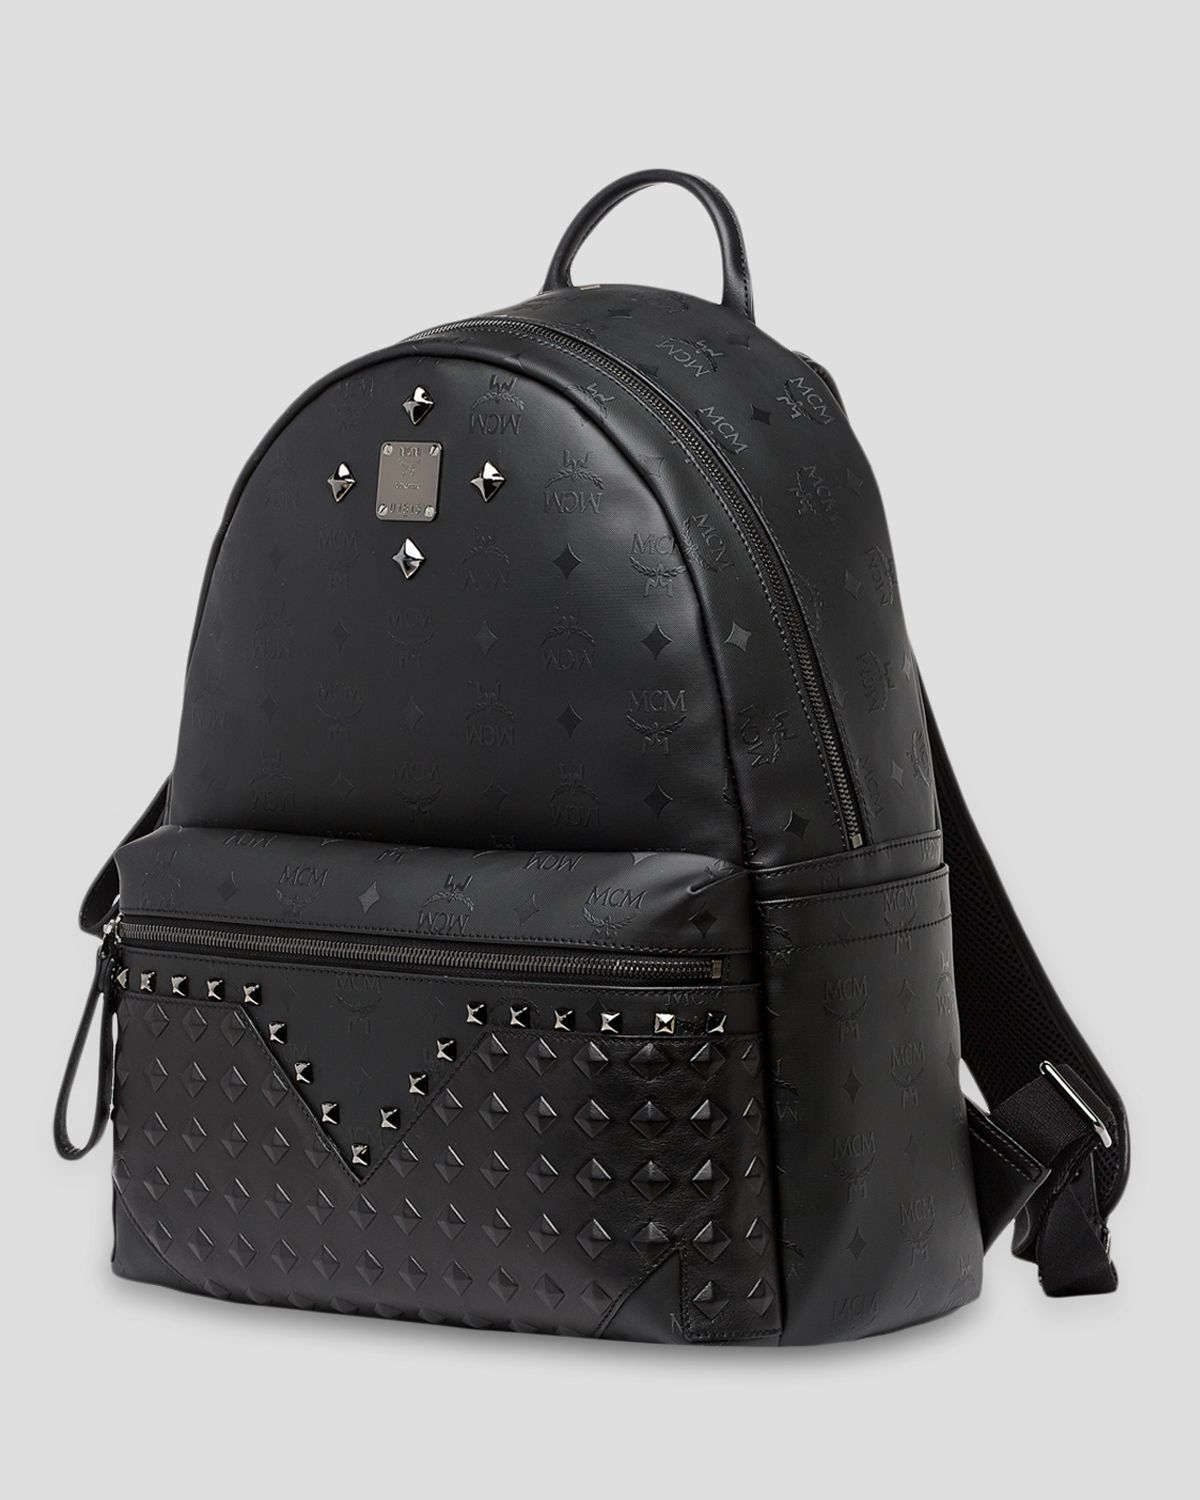 Mcm Backpack - M Moment Black Crystals Studded in Black | Lyst